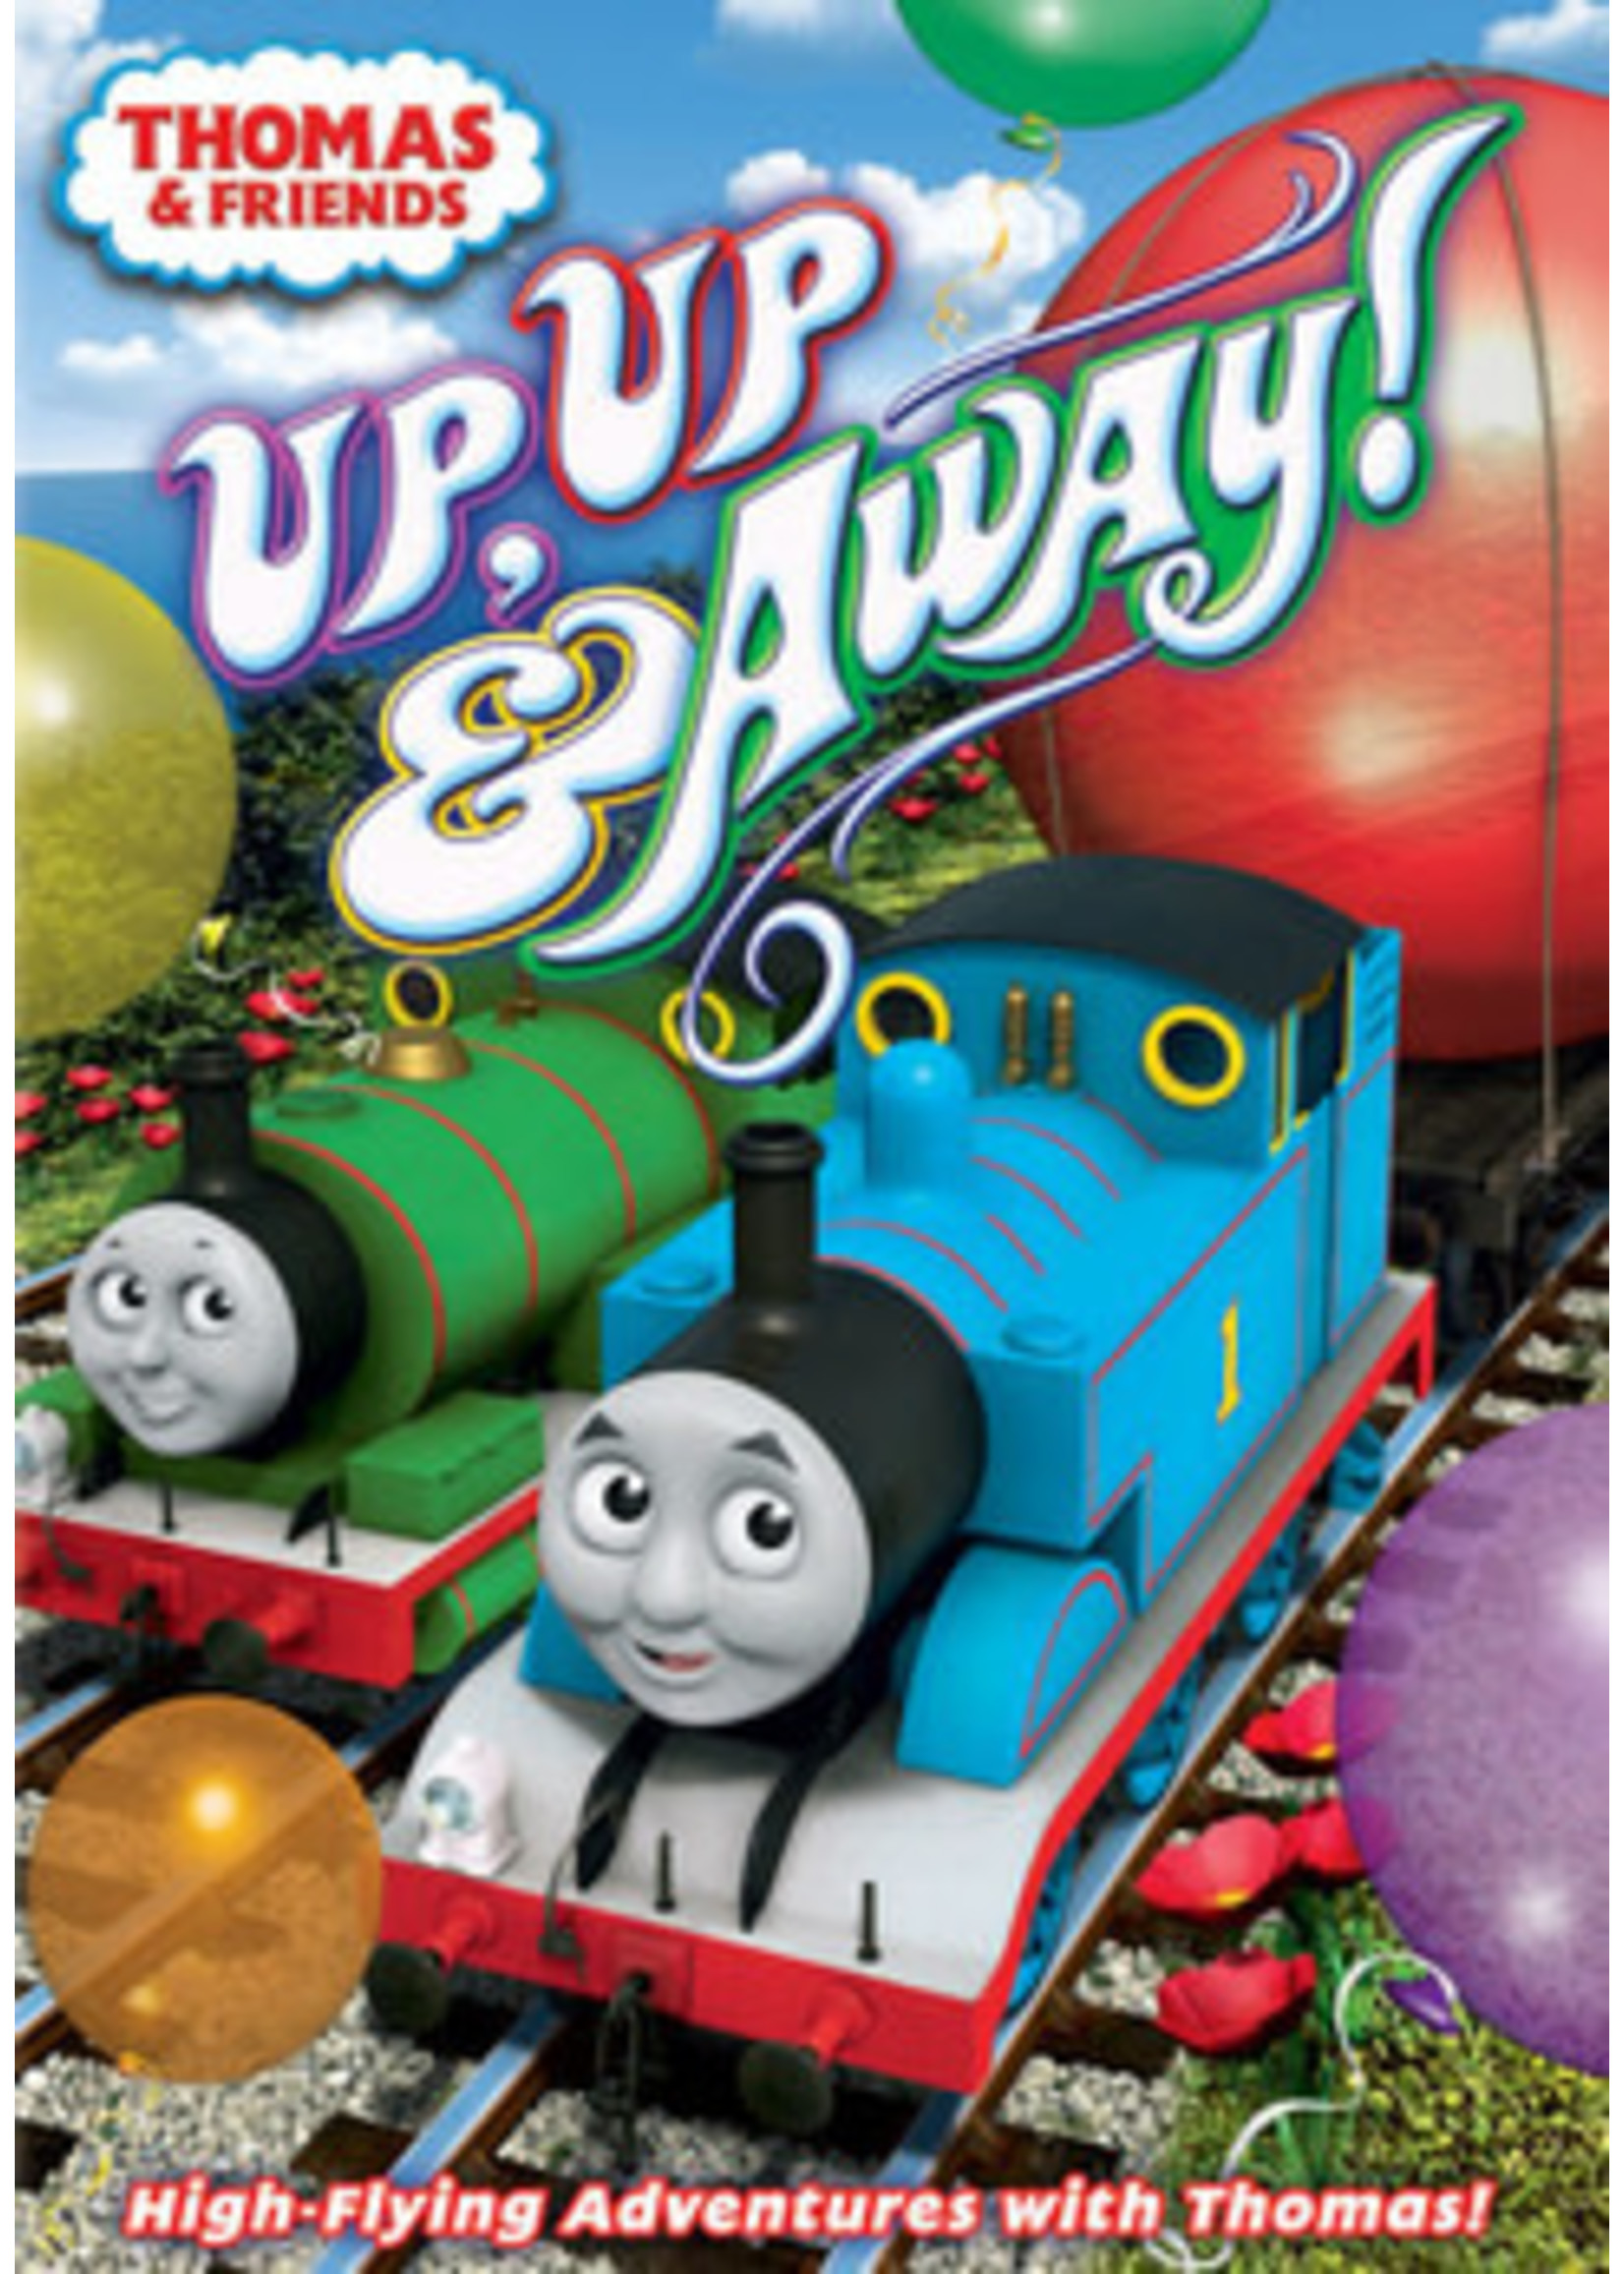 Up up and Away! DVD